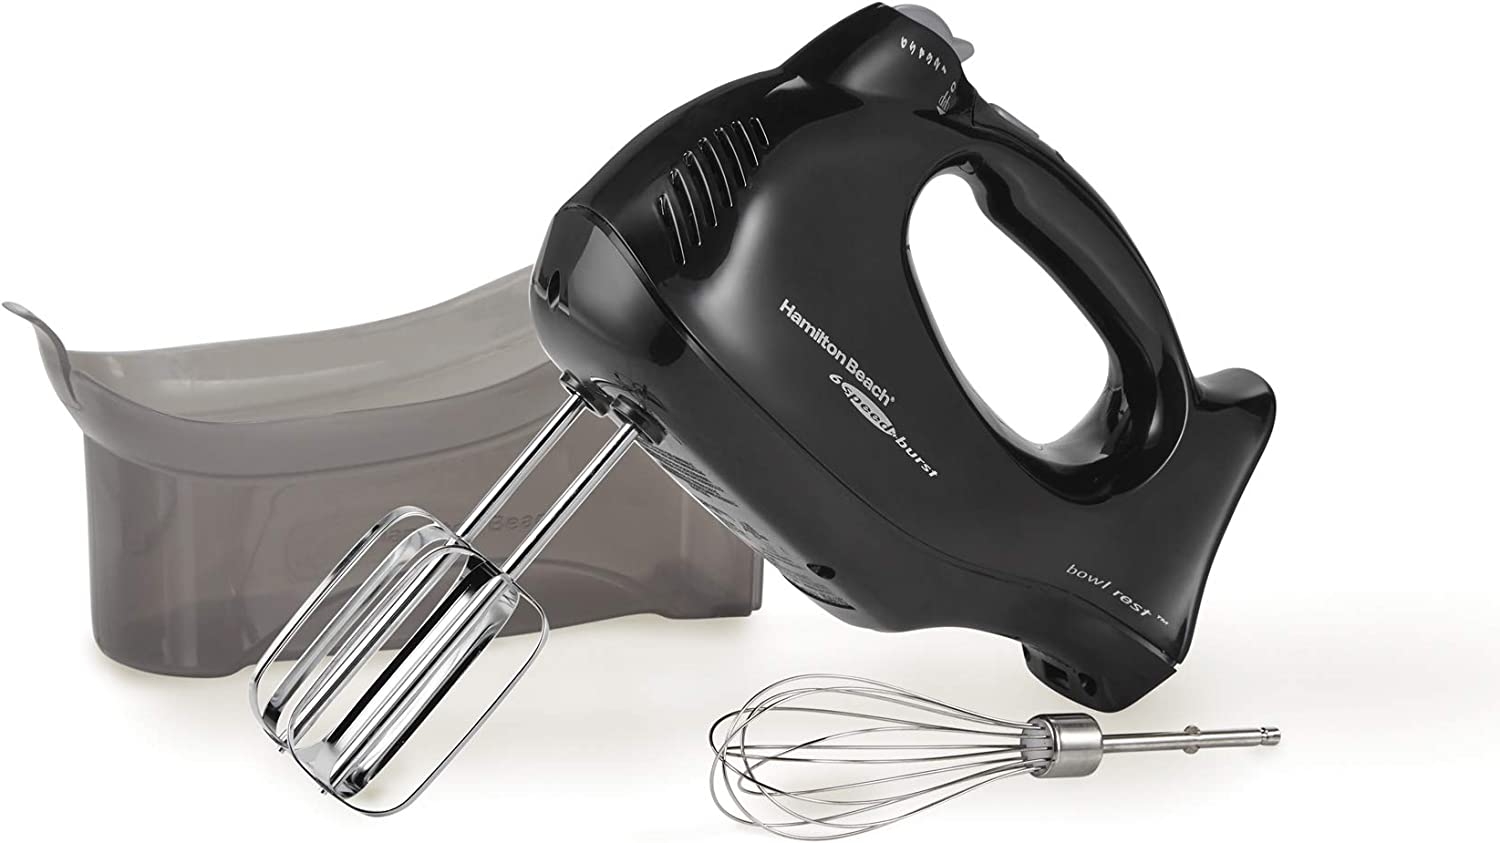 Hamilton Beach 6-Speed Electric Hand Mixer with Snap-On Case, Beaters, Whisk, Black (62692) Import To Shop ×Product